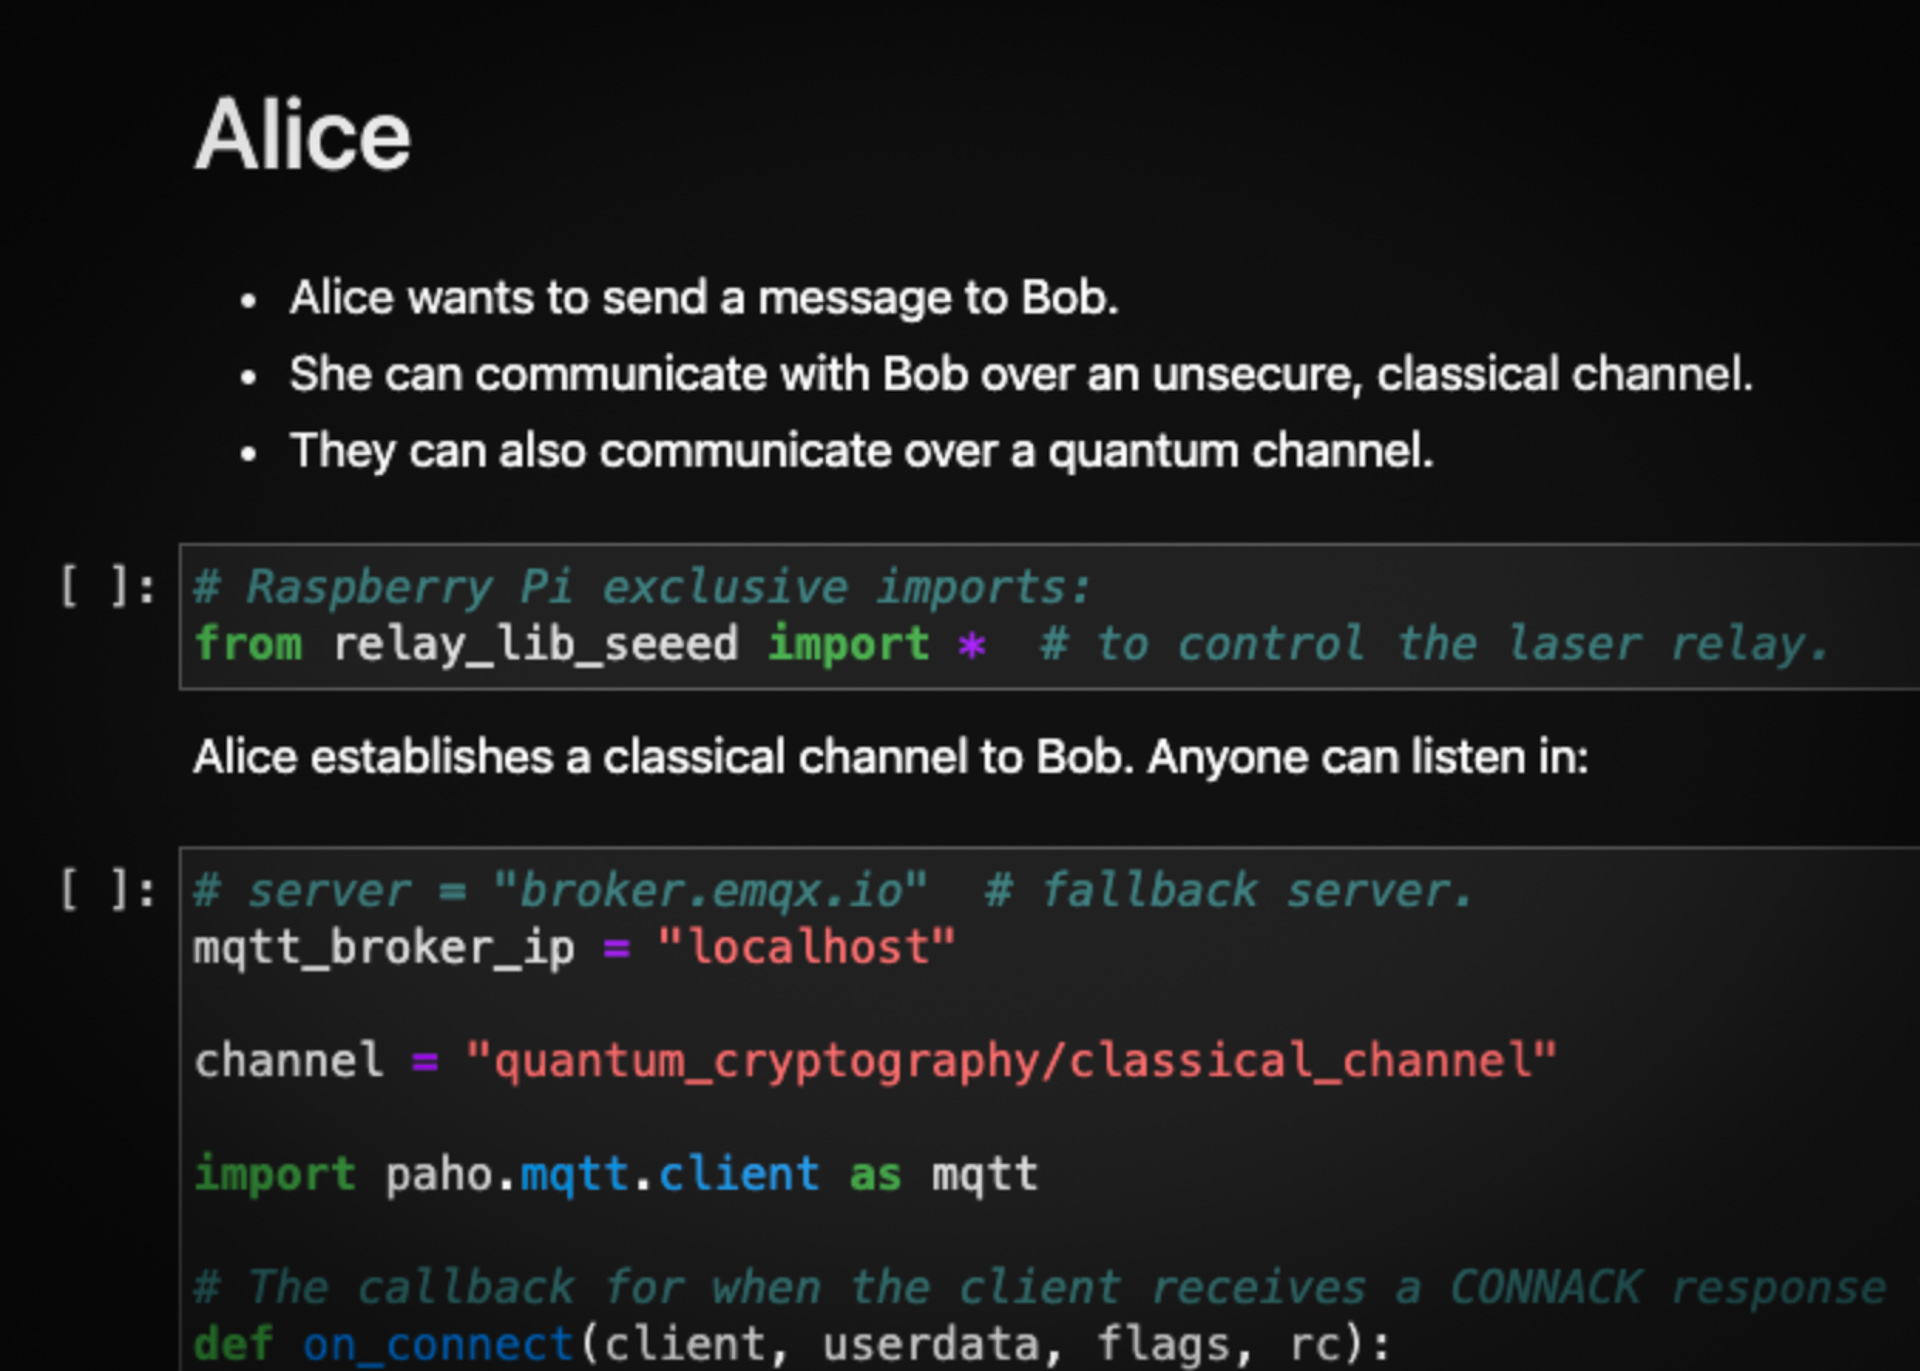 quantum cryptography: JupyterLab notebook of Alice